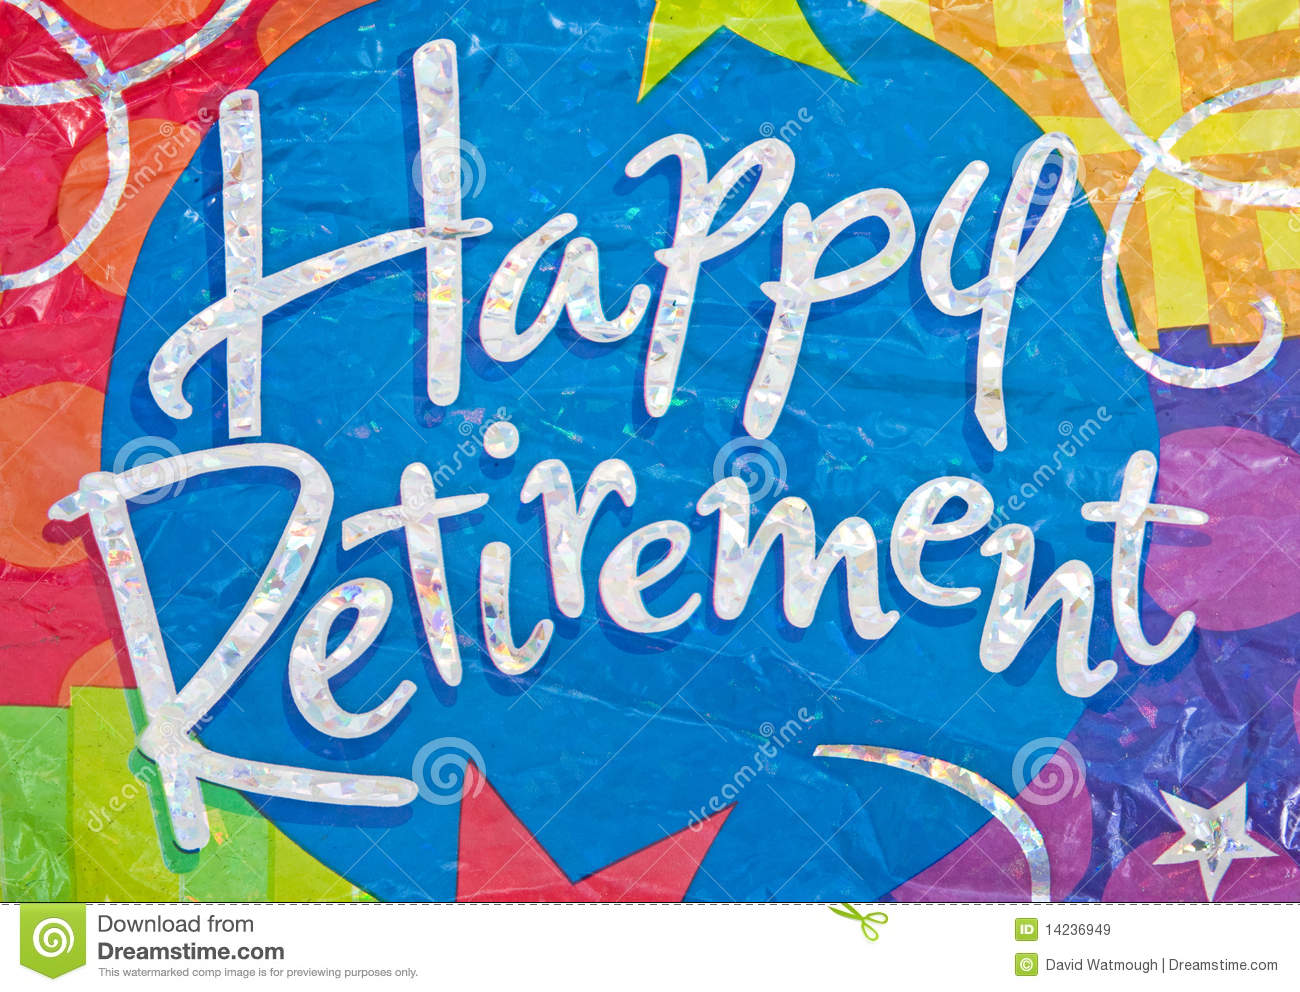 Happy Retirement  Royalty Free Stock Images   Image  14236949